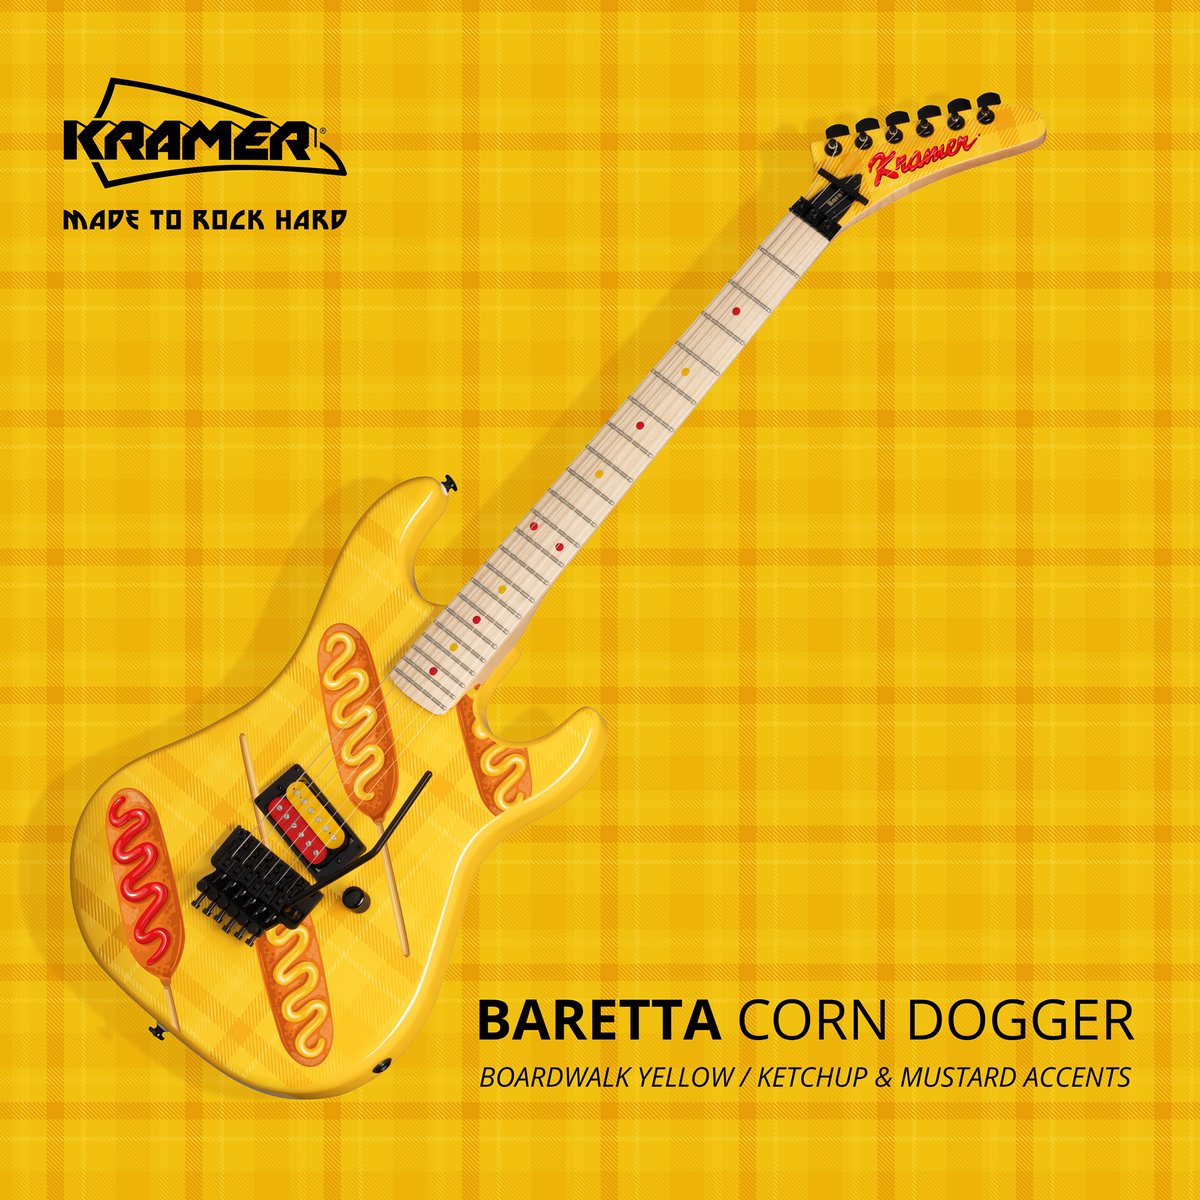 We are expanding our Party Picnic Collection with this tribute to one of the most delicious guitar designs in rock, the Baretta. Featuring a single Kramer Eruption Humbucker and a fresh out the fryer scratch-and-stiff sent. Available with your choice of condiments. 🤘🌽🌭😉